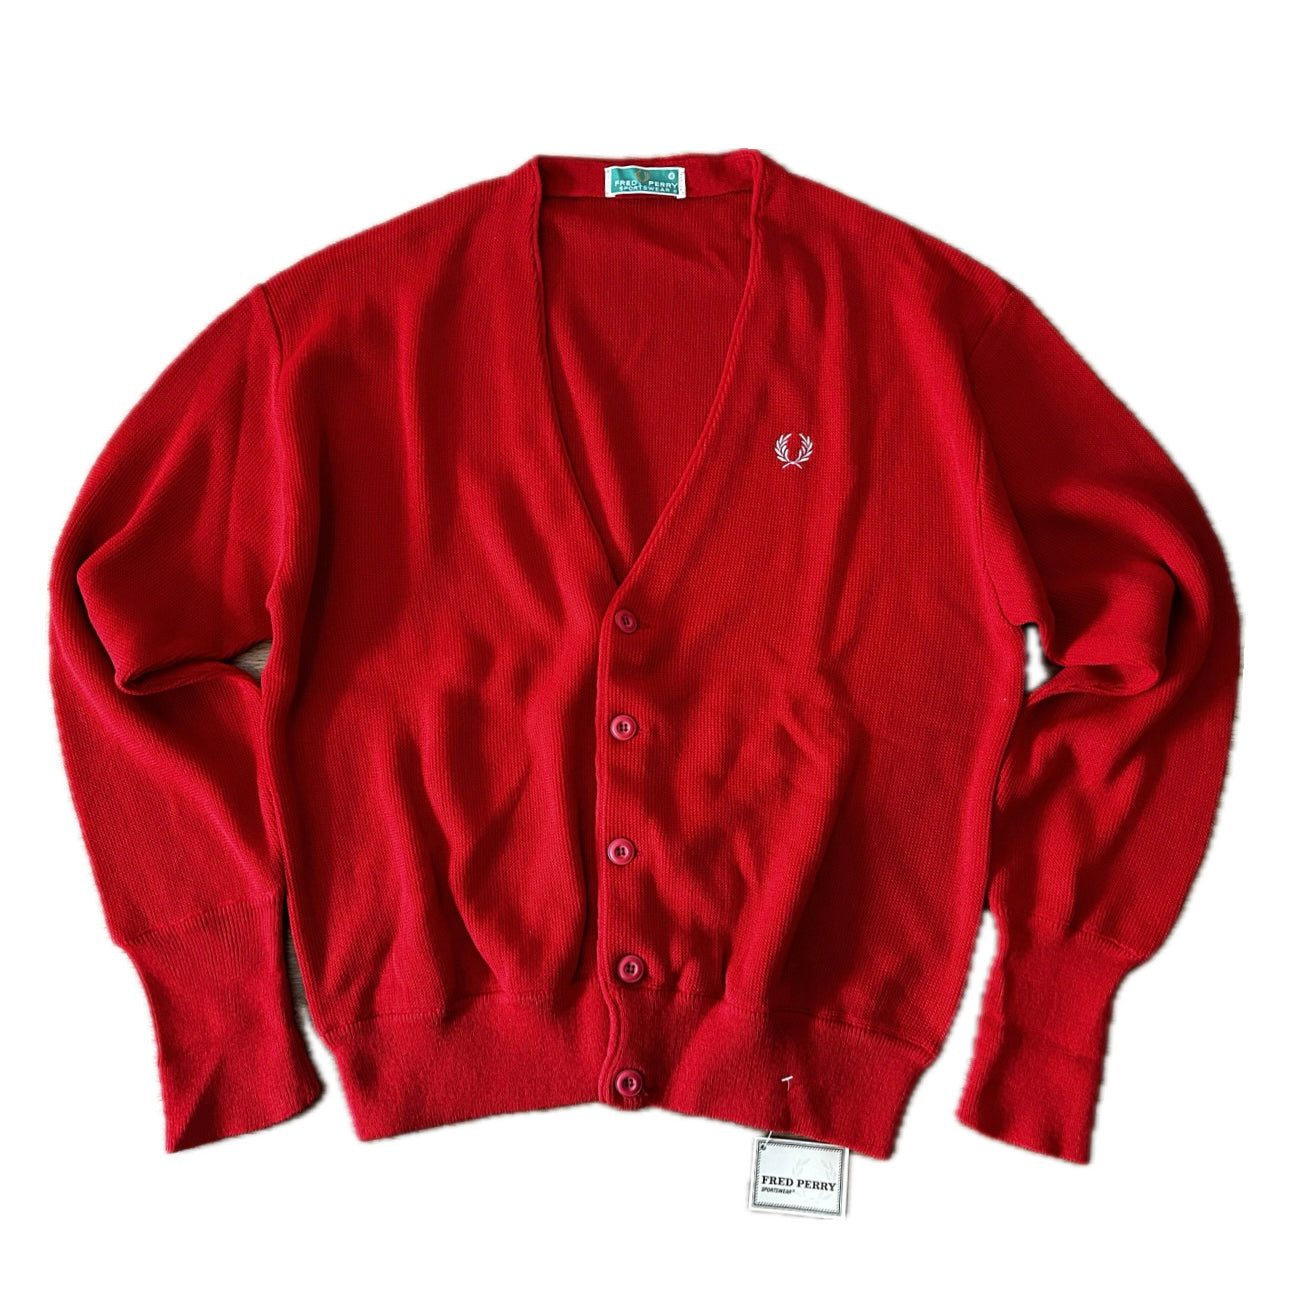 Fred Perry Vintage 80 Red Cardigan - Deadstock - 4 / M - Made in Spain